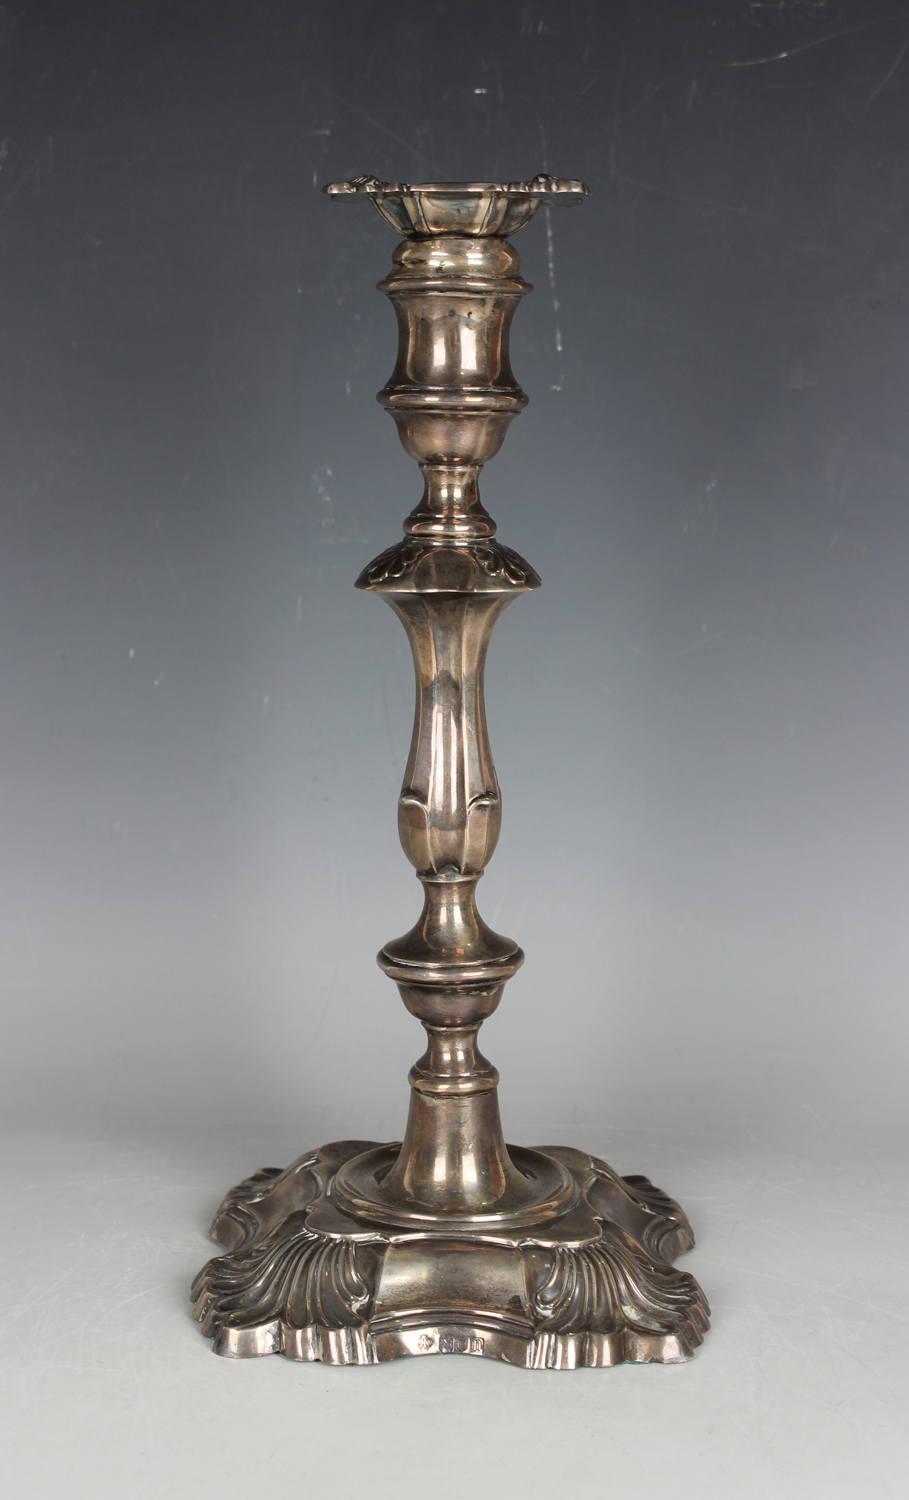 An Edwardian silver candlestick of baluster form with stylized scallop shell decoration, on a